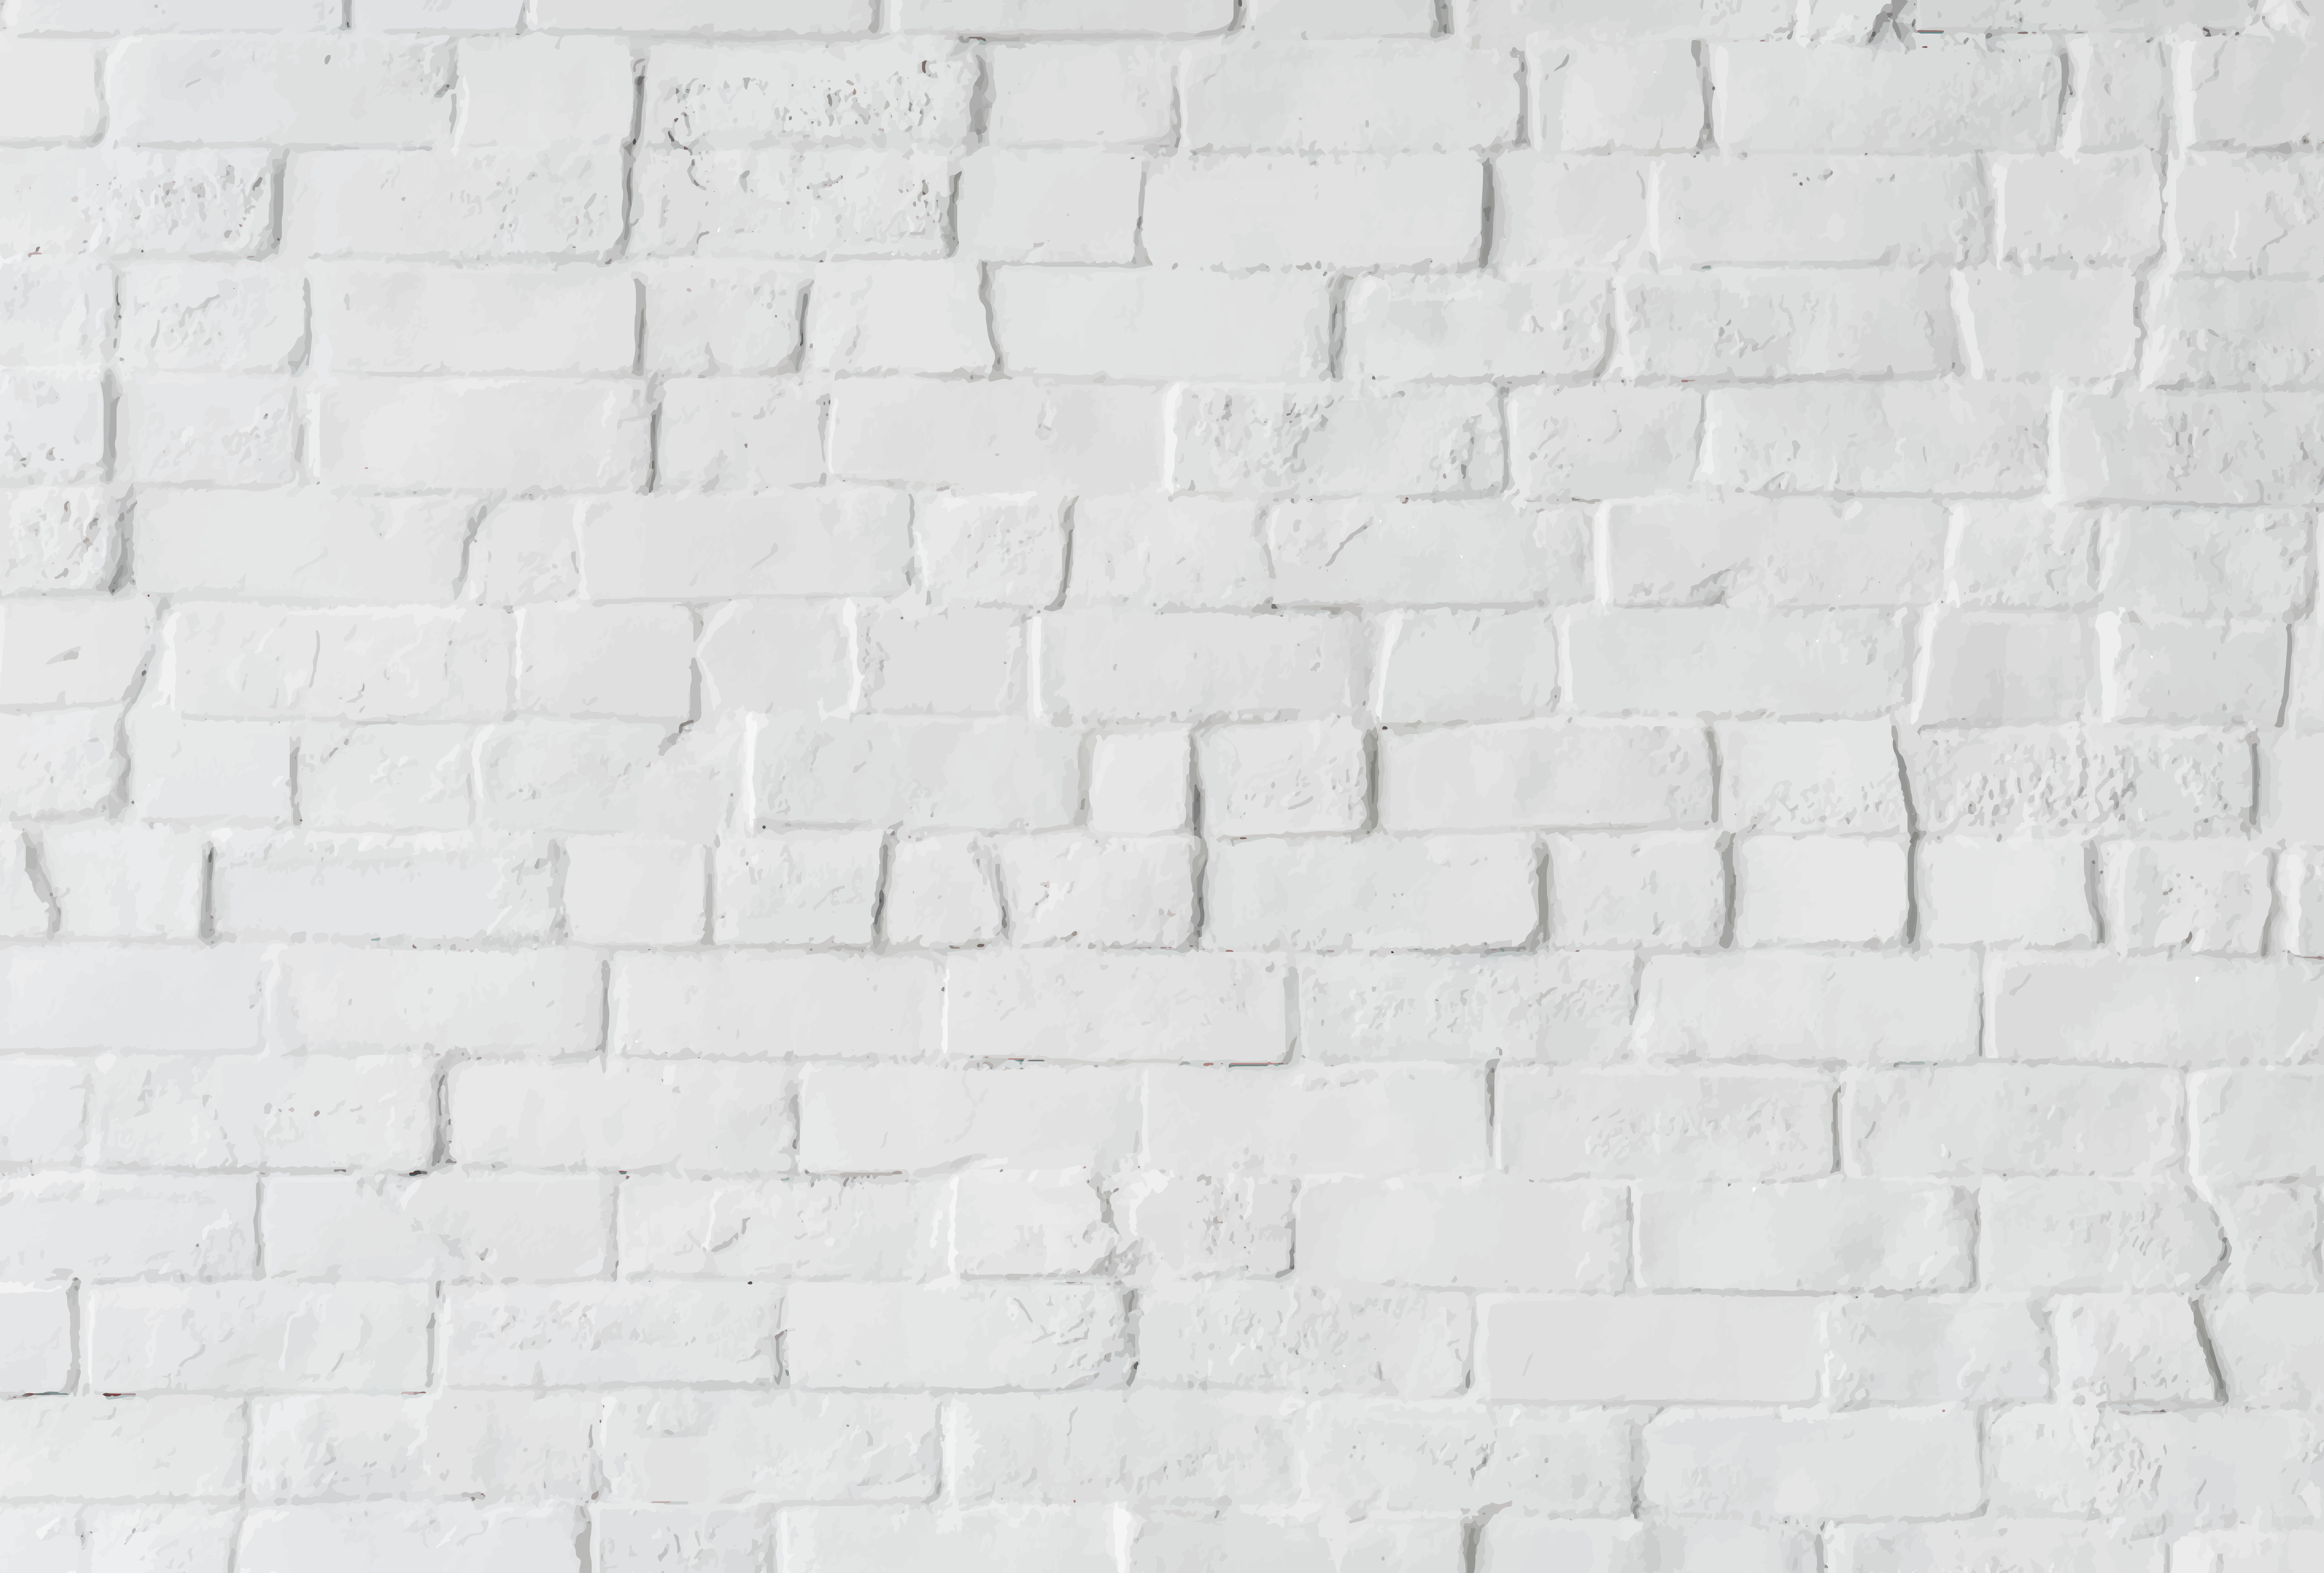  White  brick  wall  with design space Download Free Vectors 